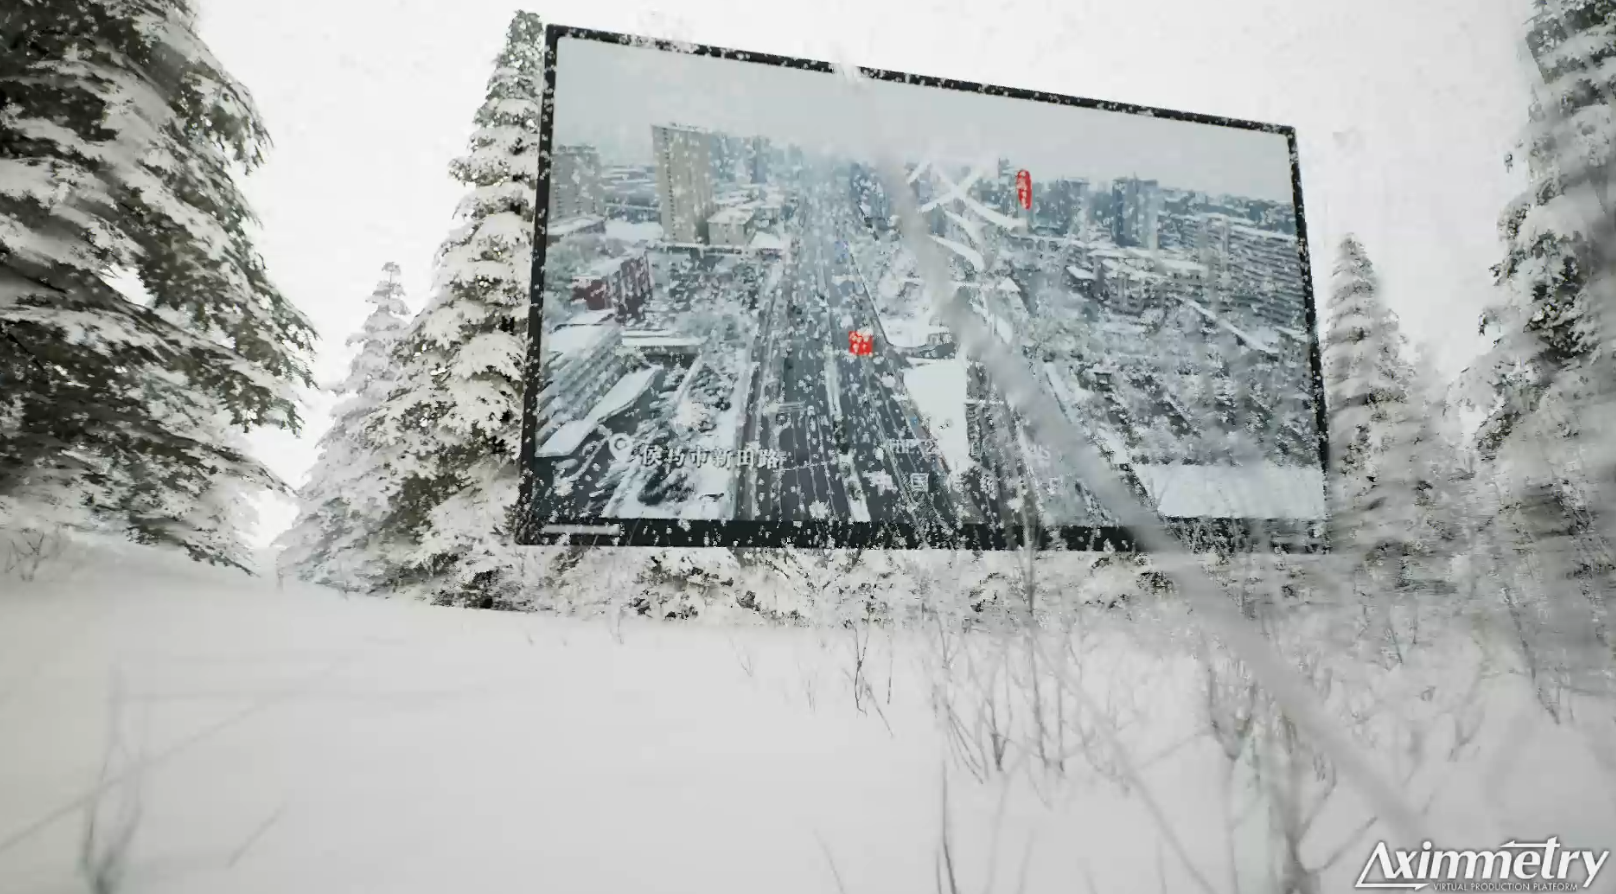 how to put billboard into fx such as snow or rain？